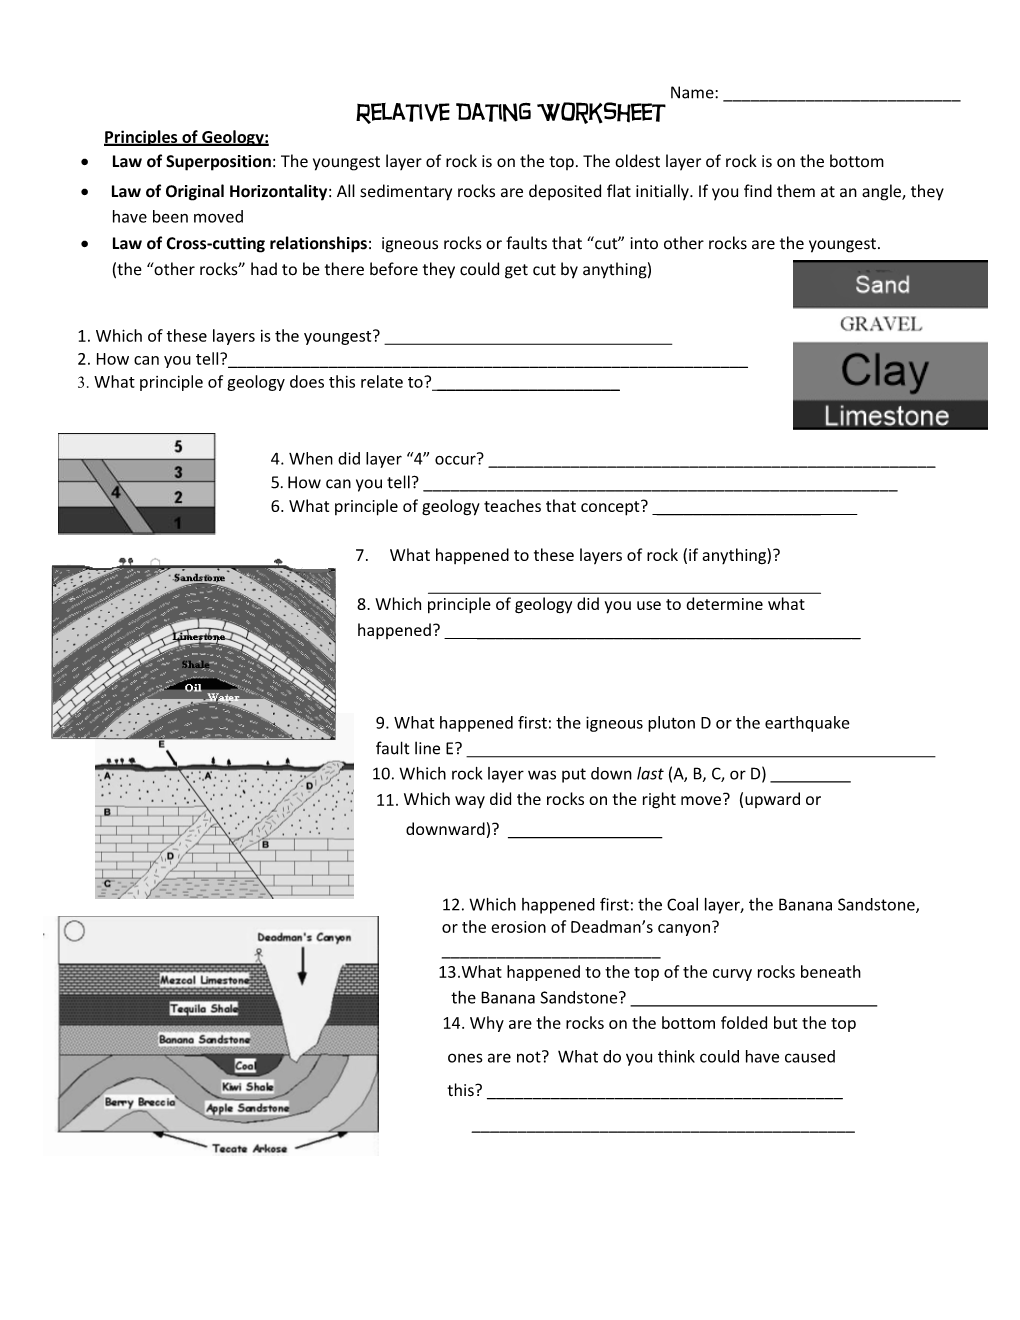 Relative Dating Worksheet Principles of Geology: Law of Superposition